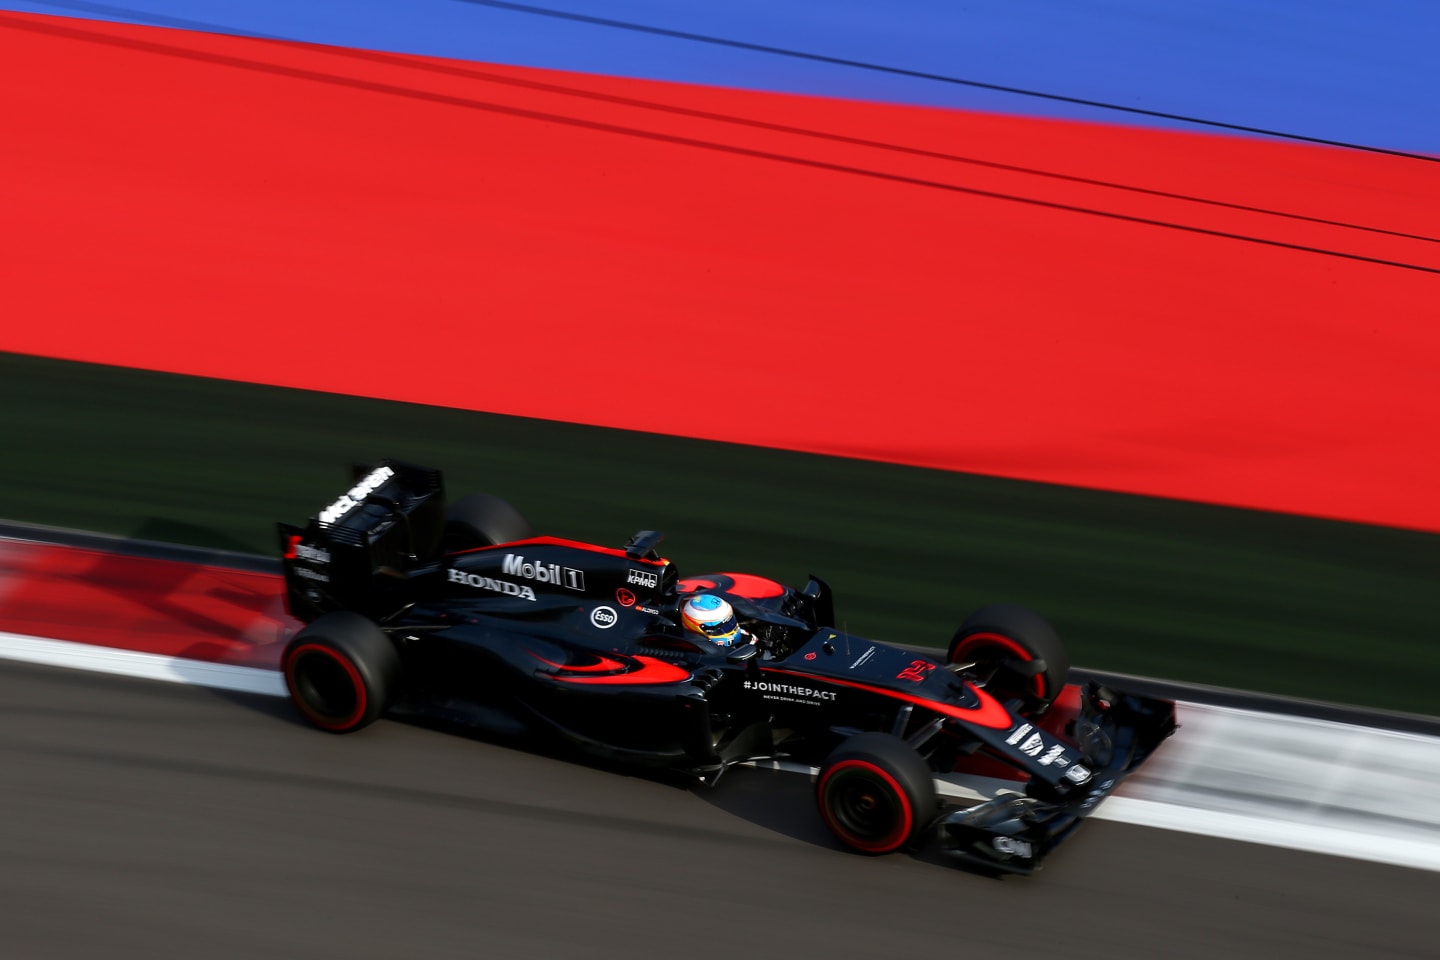 McLaren changed their livery to black from the Spanish GP onwards - but their fortunes stayed the same